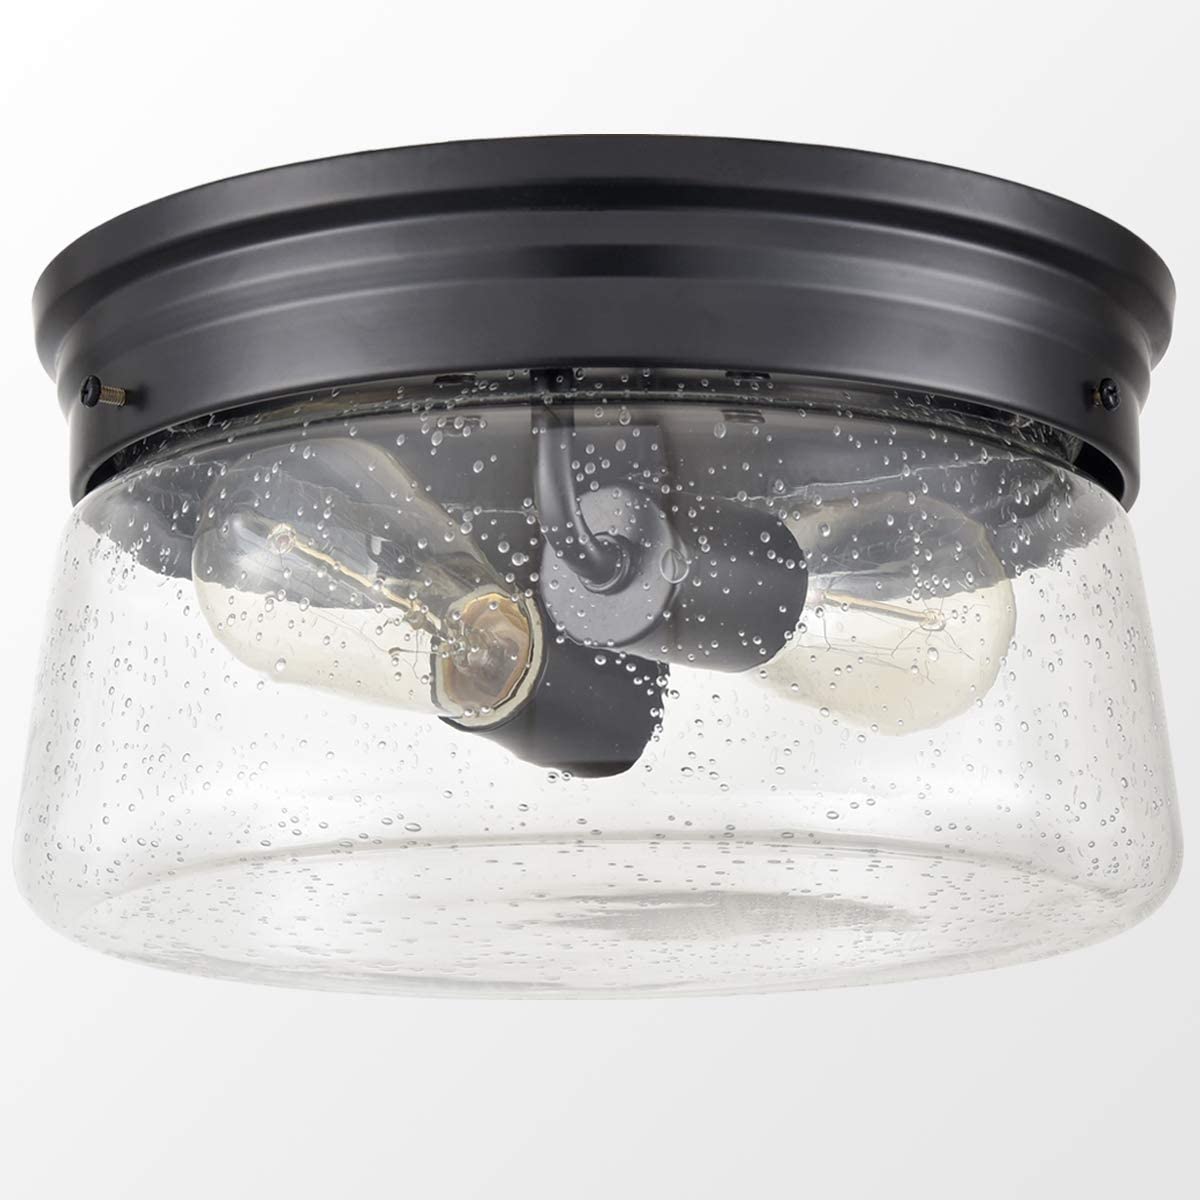 Black flush mount ceiling light fixture with seeded glass shade